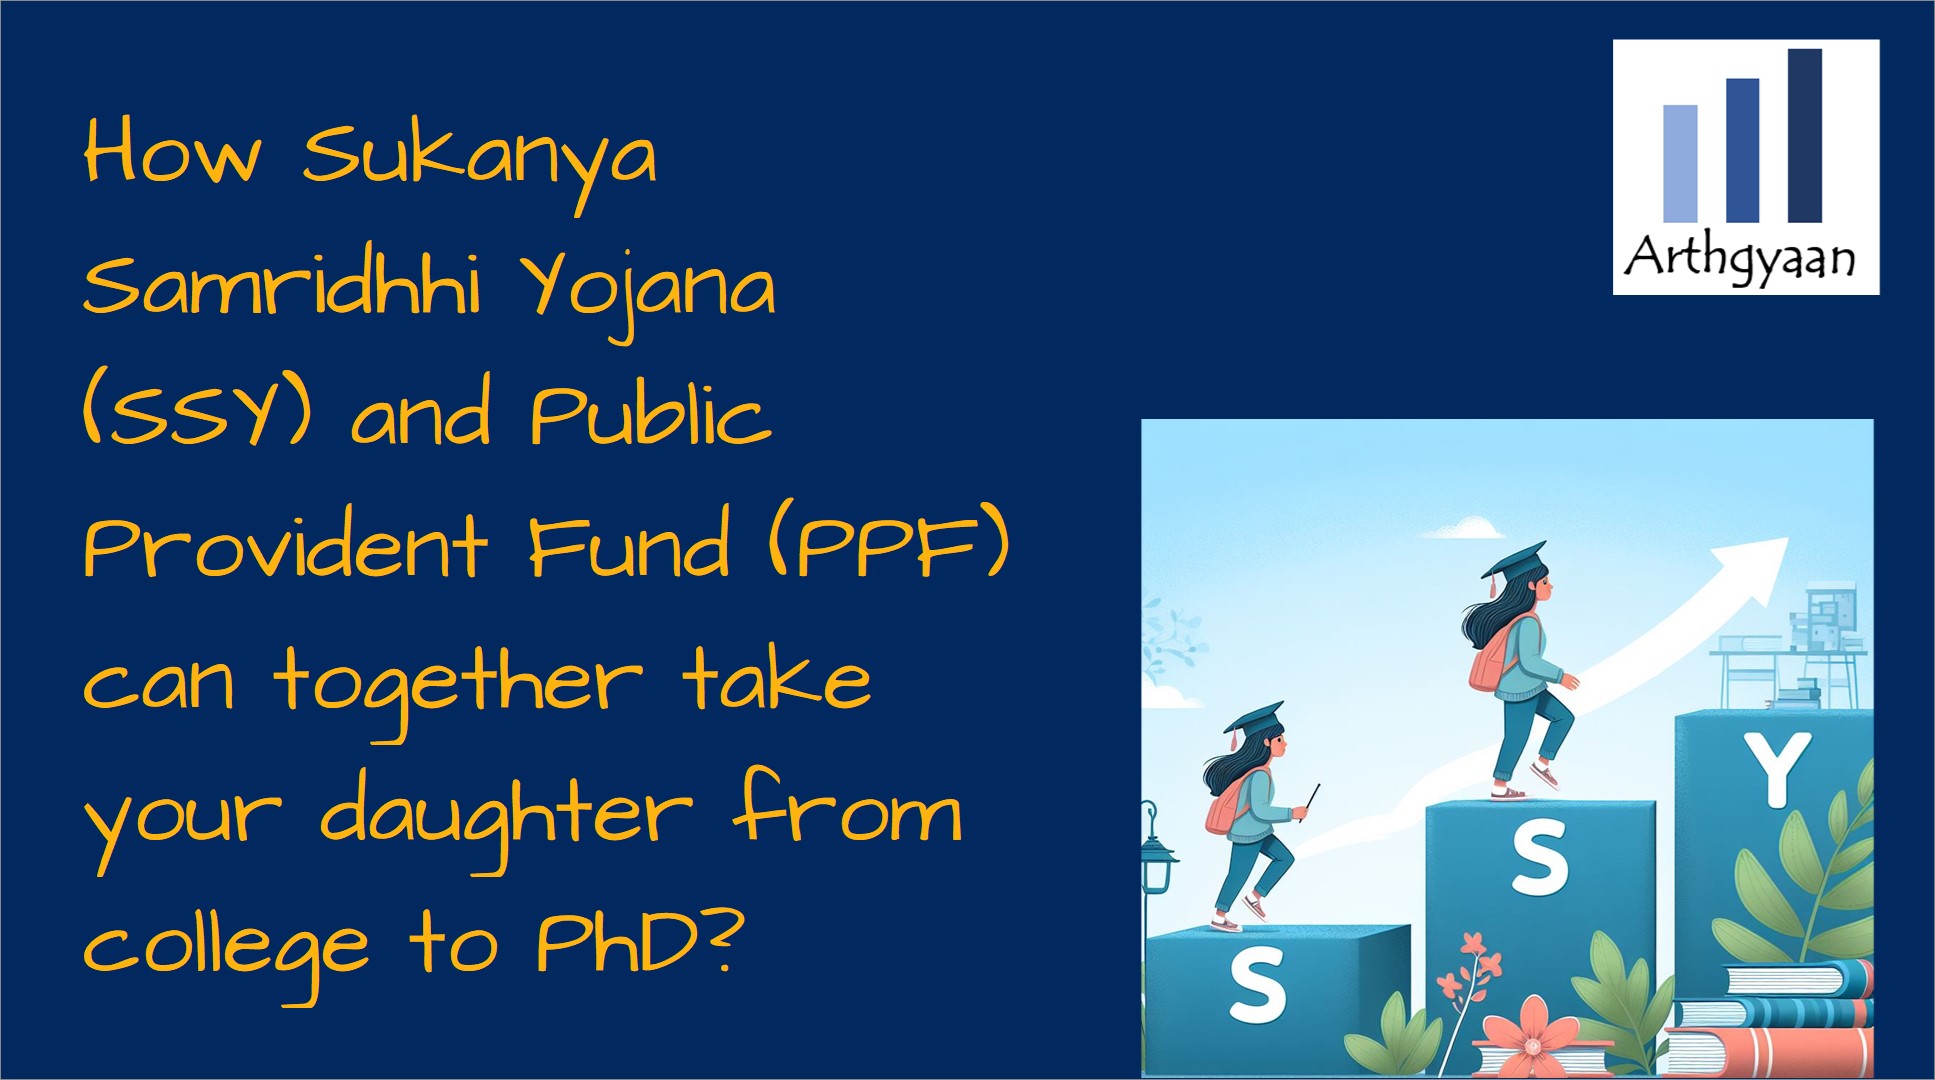 How Sukanya Samridhhi Yojana (SSY) and Public Provident Fund (PPF) can together take your daughter from college to PhD?